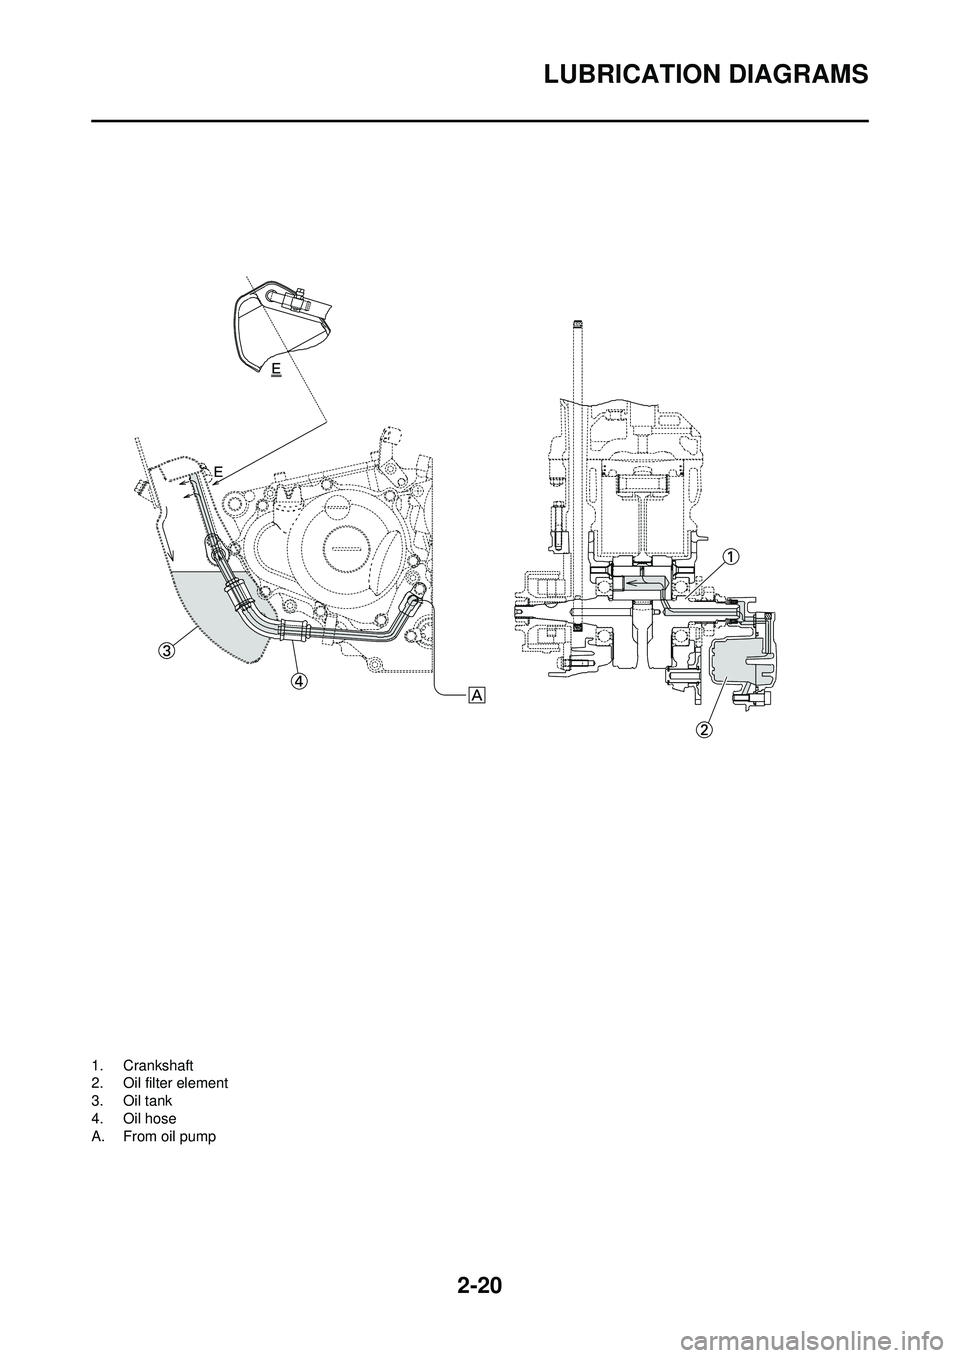 YAMAHA WR 250F 2010  Owners Manual 2-20
LUBRICATION DIAGRAMS
1. Crankshaft
2. Oil filter element
3. Oil tank
4. Oil hose
A. From oil pump 